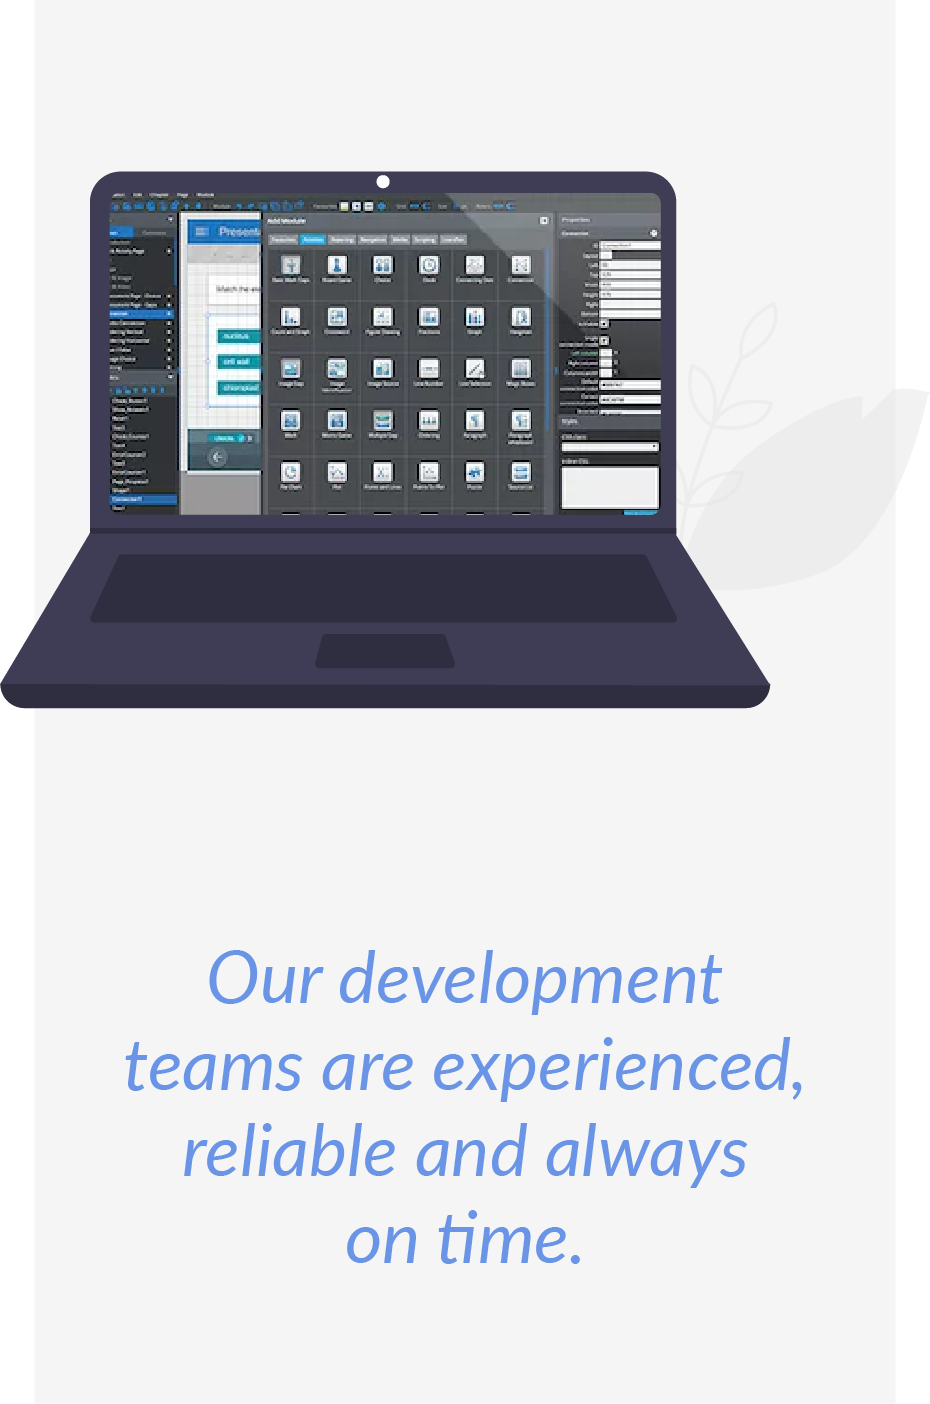 our development teams expiendced reliable always on time